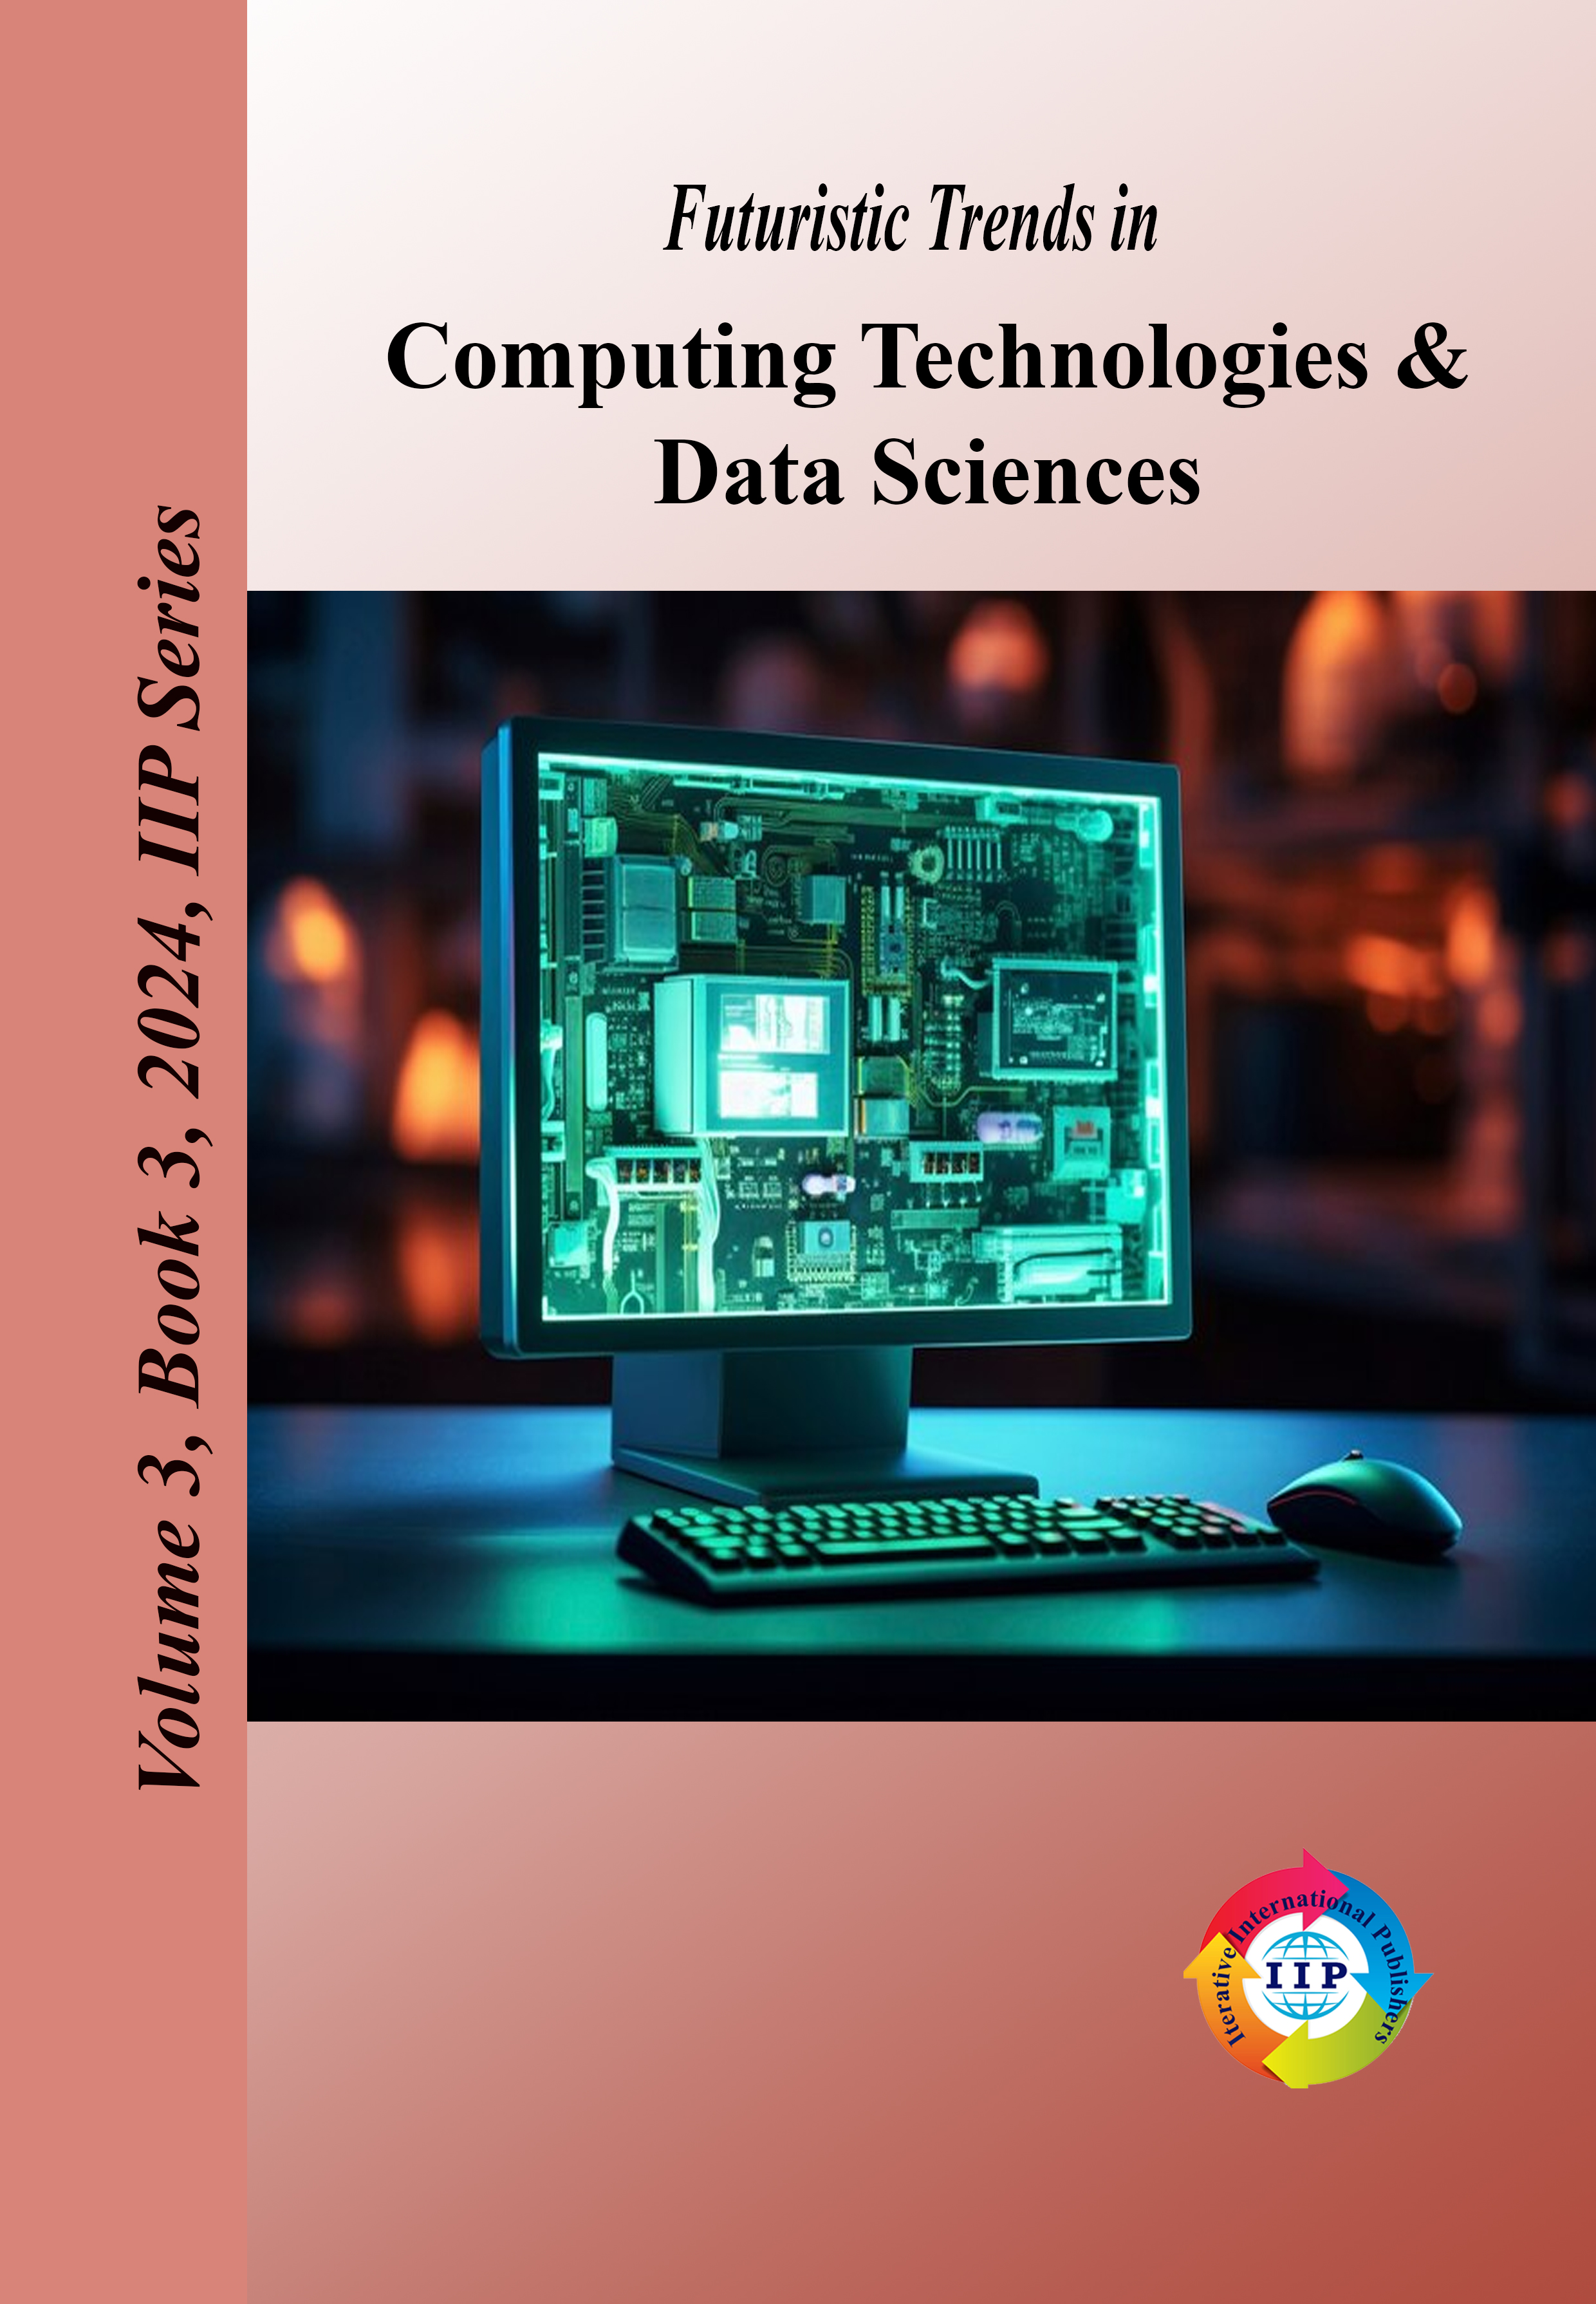 Futuristic Trends in Computing Technologies and Data Sciences Volume 3 Book 3